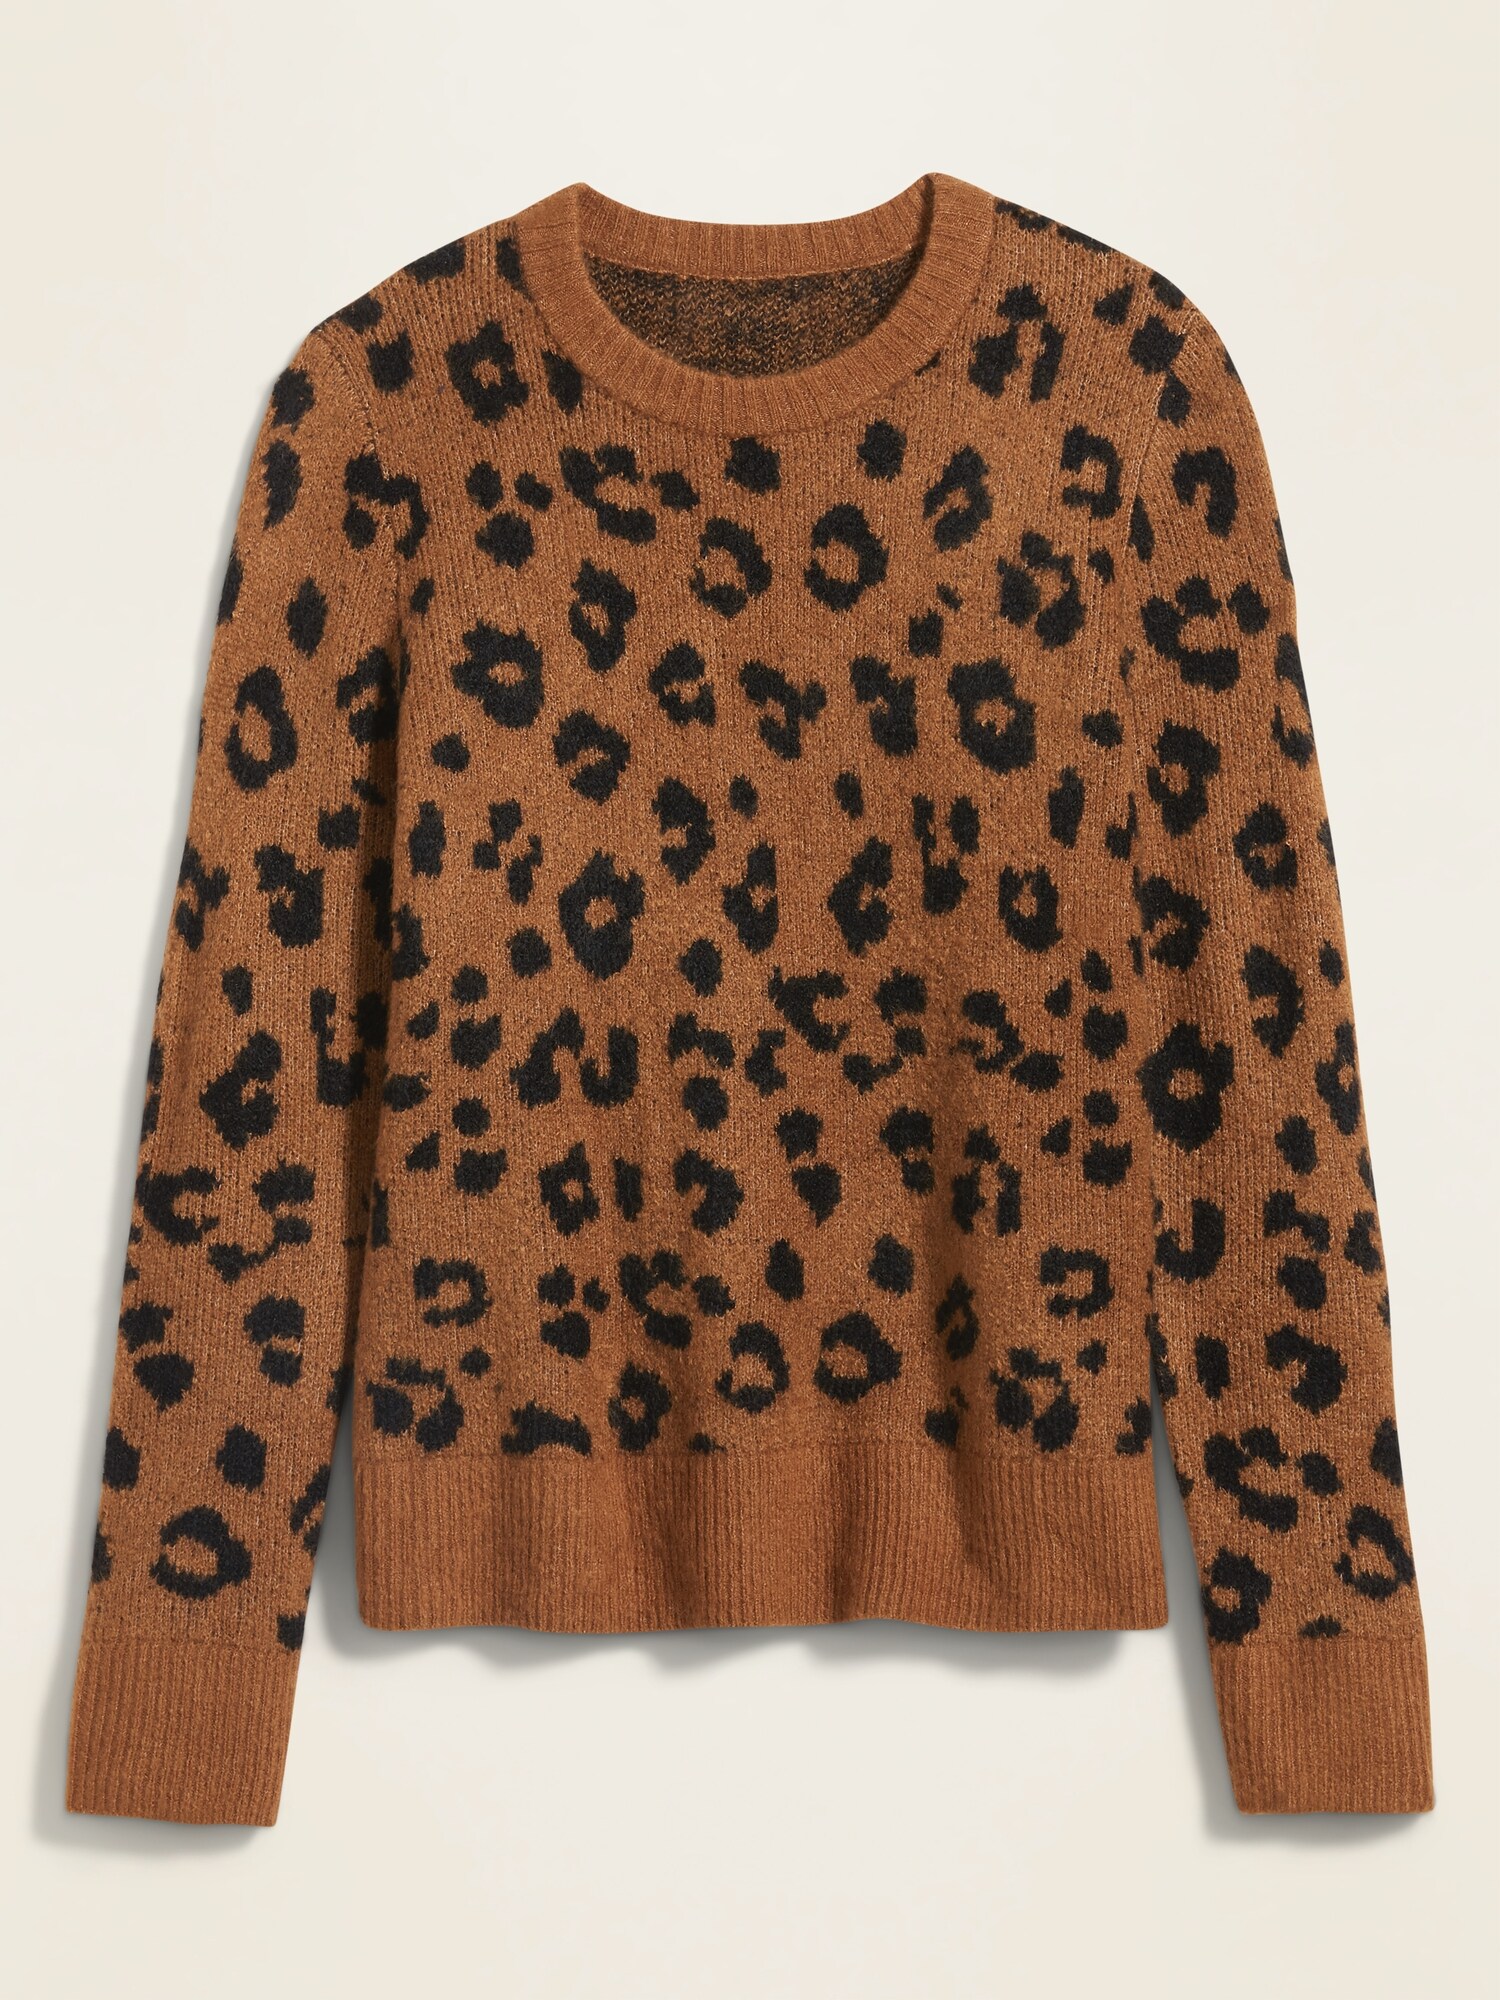 NEW Knox Rose Leopard Print Sweater Women's 2X Crew Neck Stretch Knit  Pullover